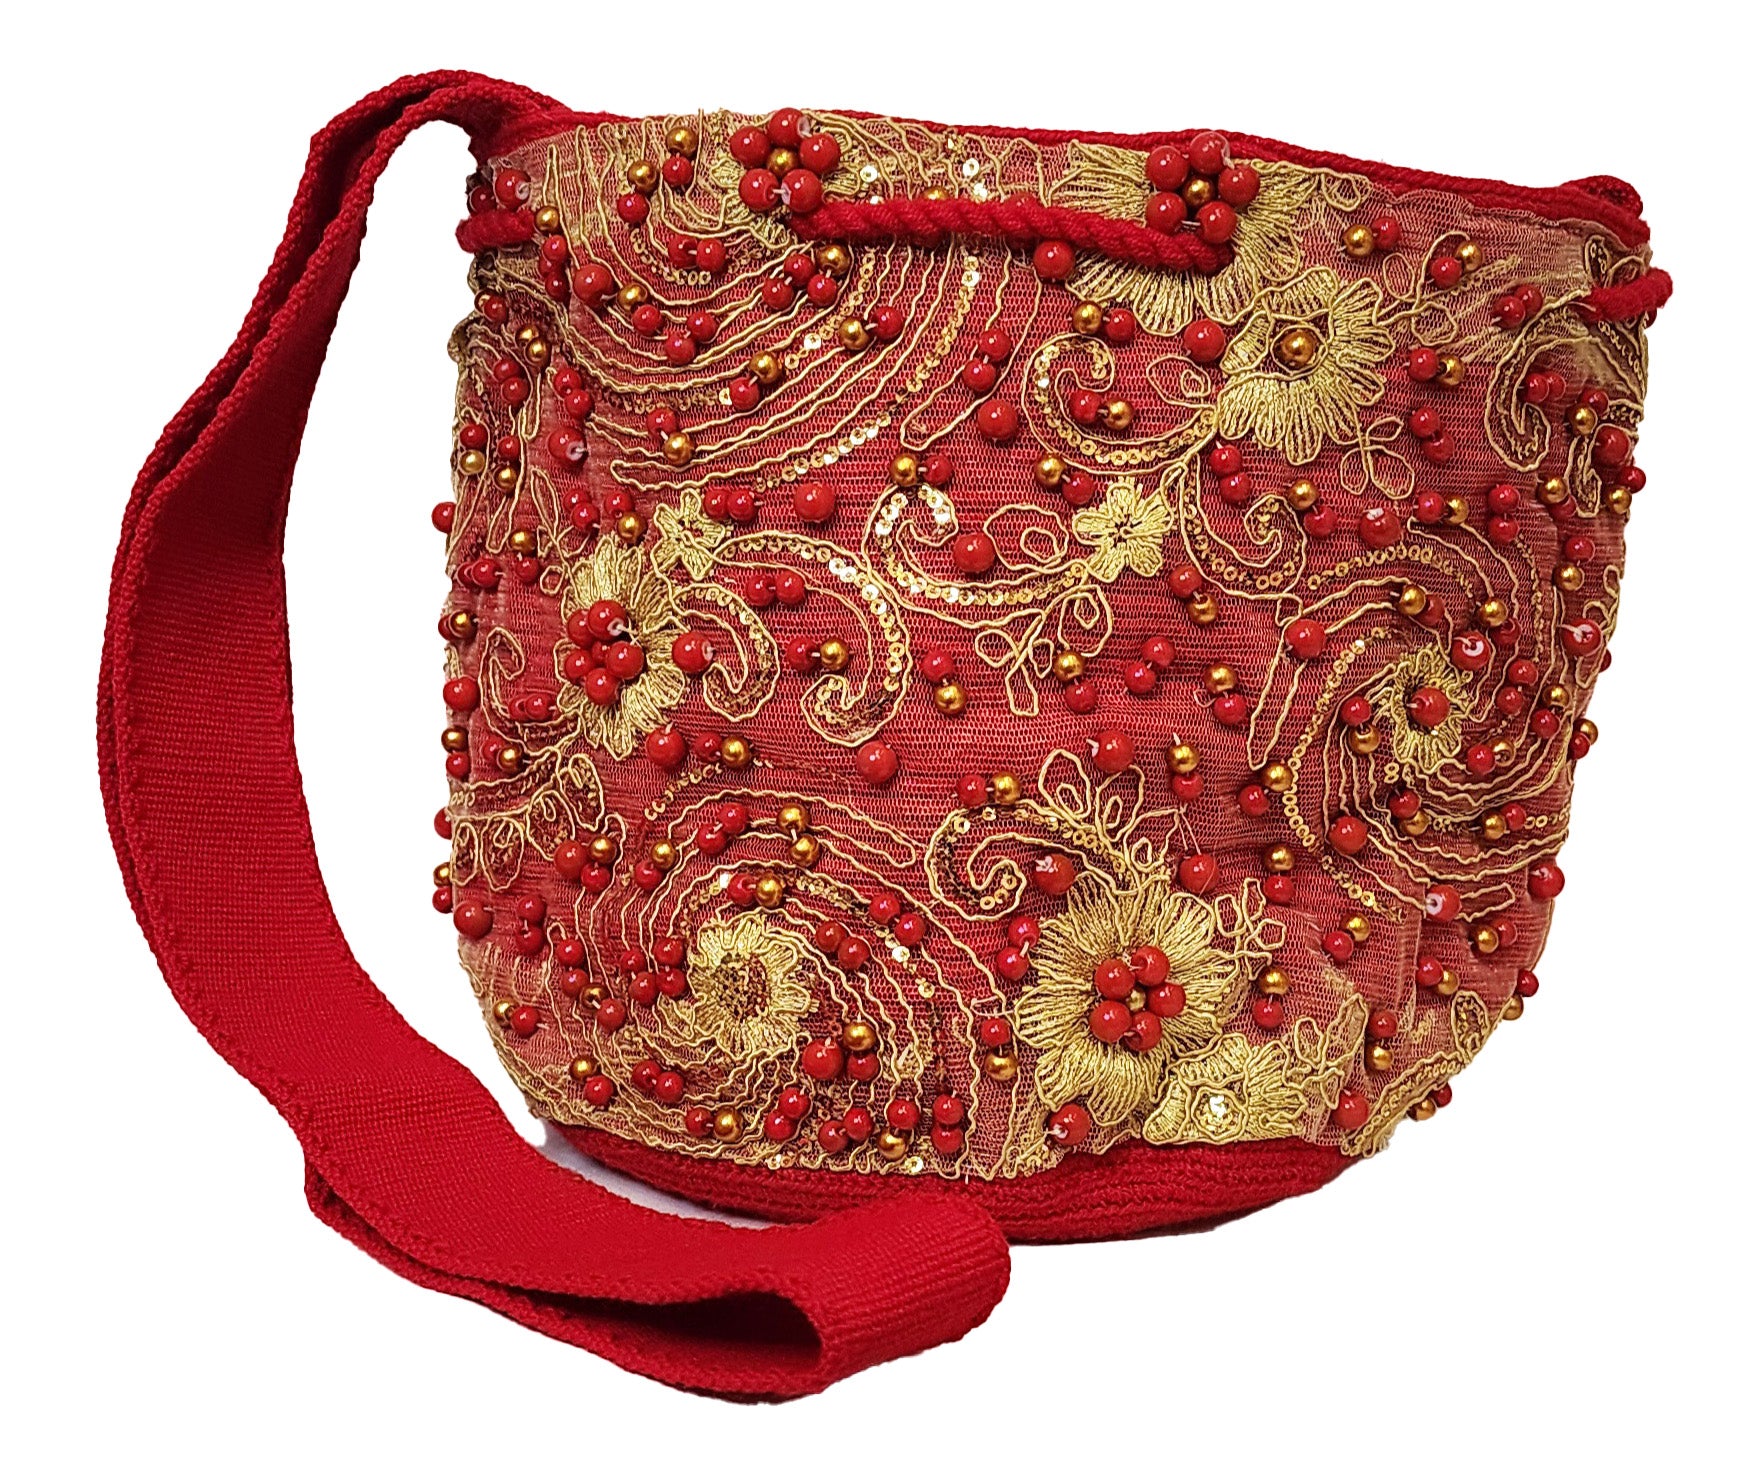 Bottom view anabella medium crochet crossbody with crystals, lace, and pearls back